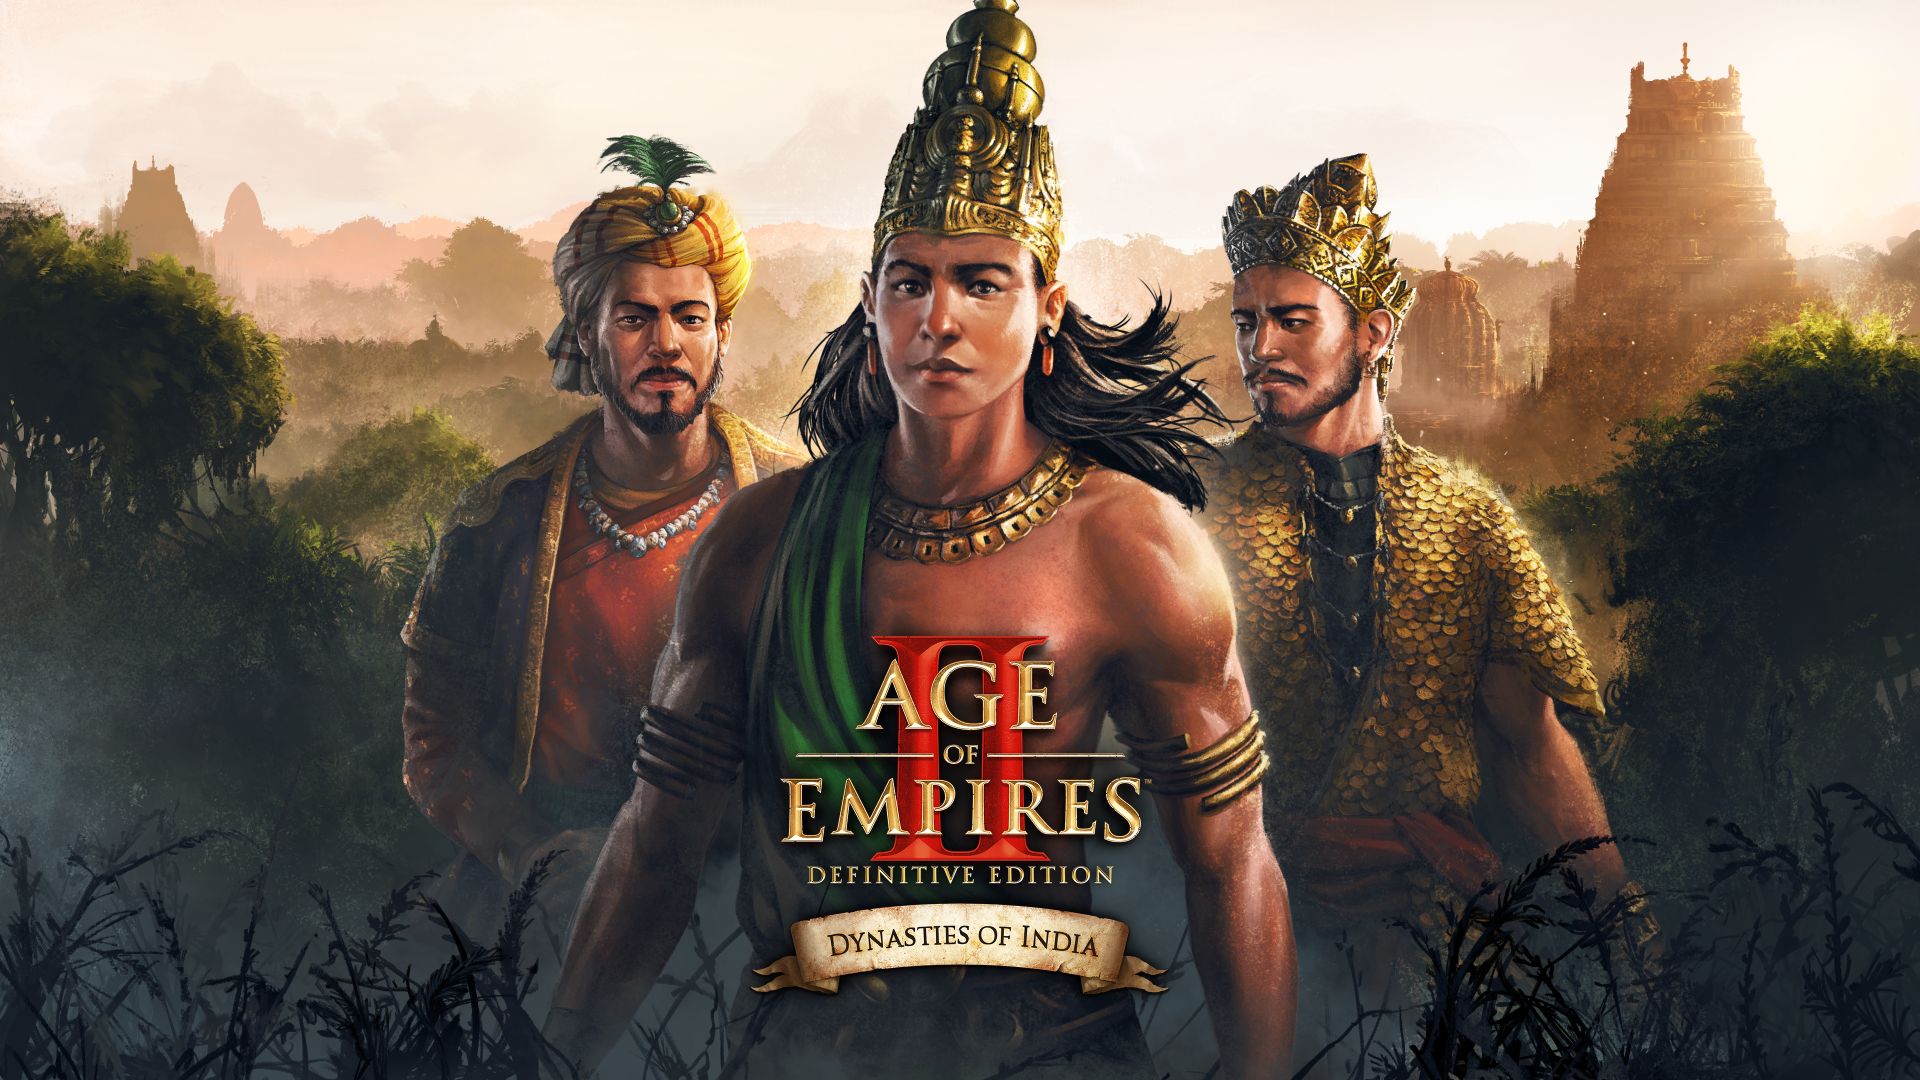 New DLC Available Now: Dynasties of India!